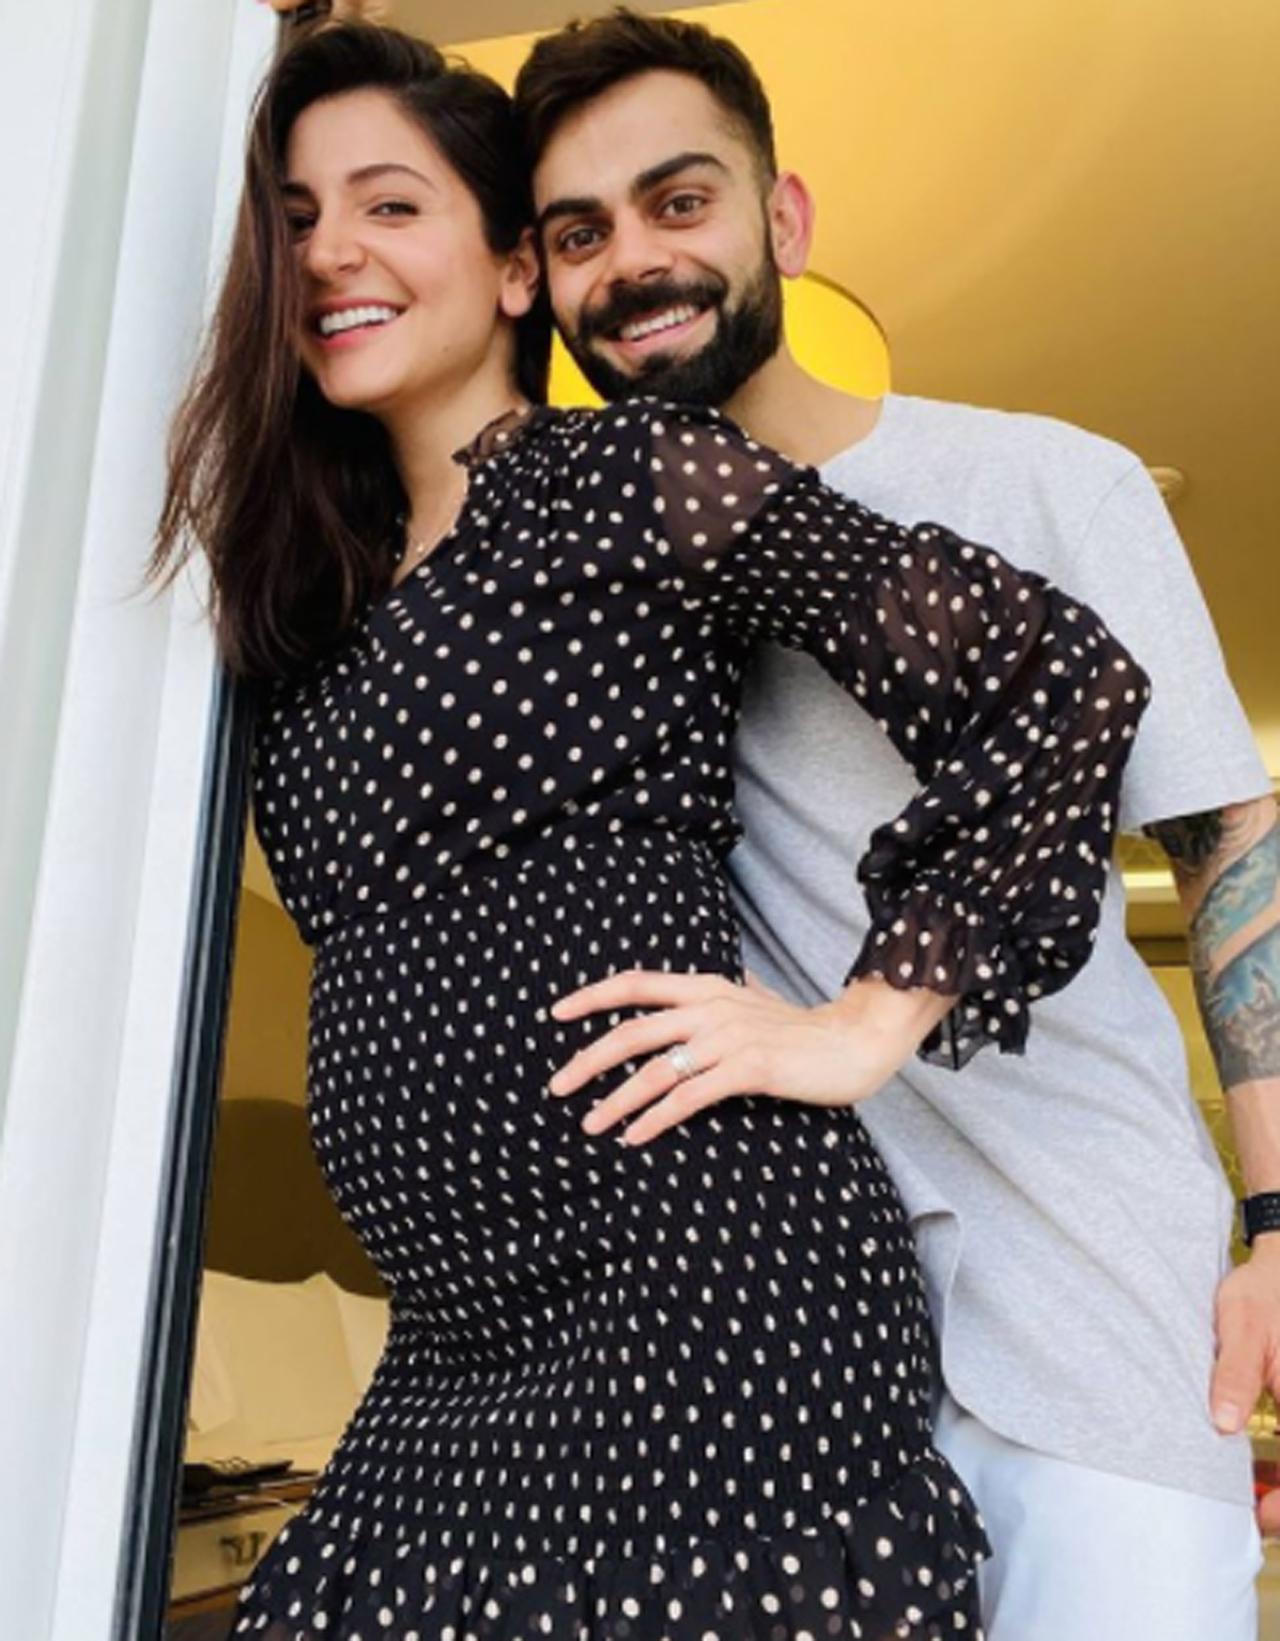 In August 2020, Virat and Anushka Sharma took to social media to announce that they were expecting a baby in January 2021